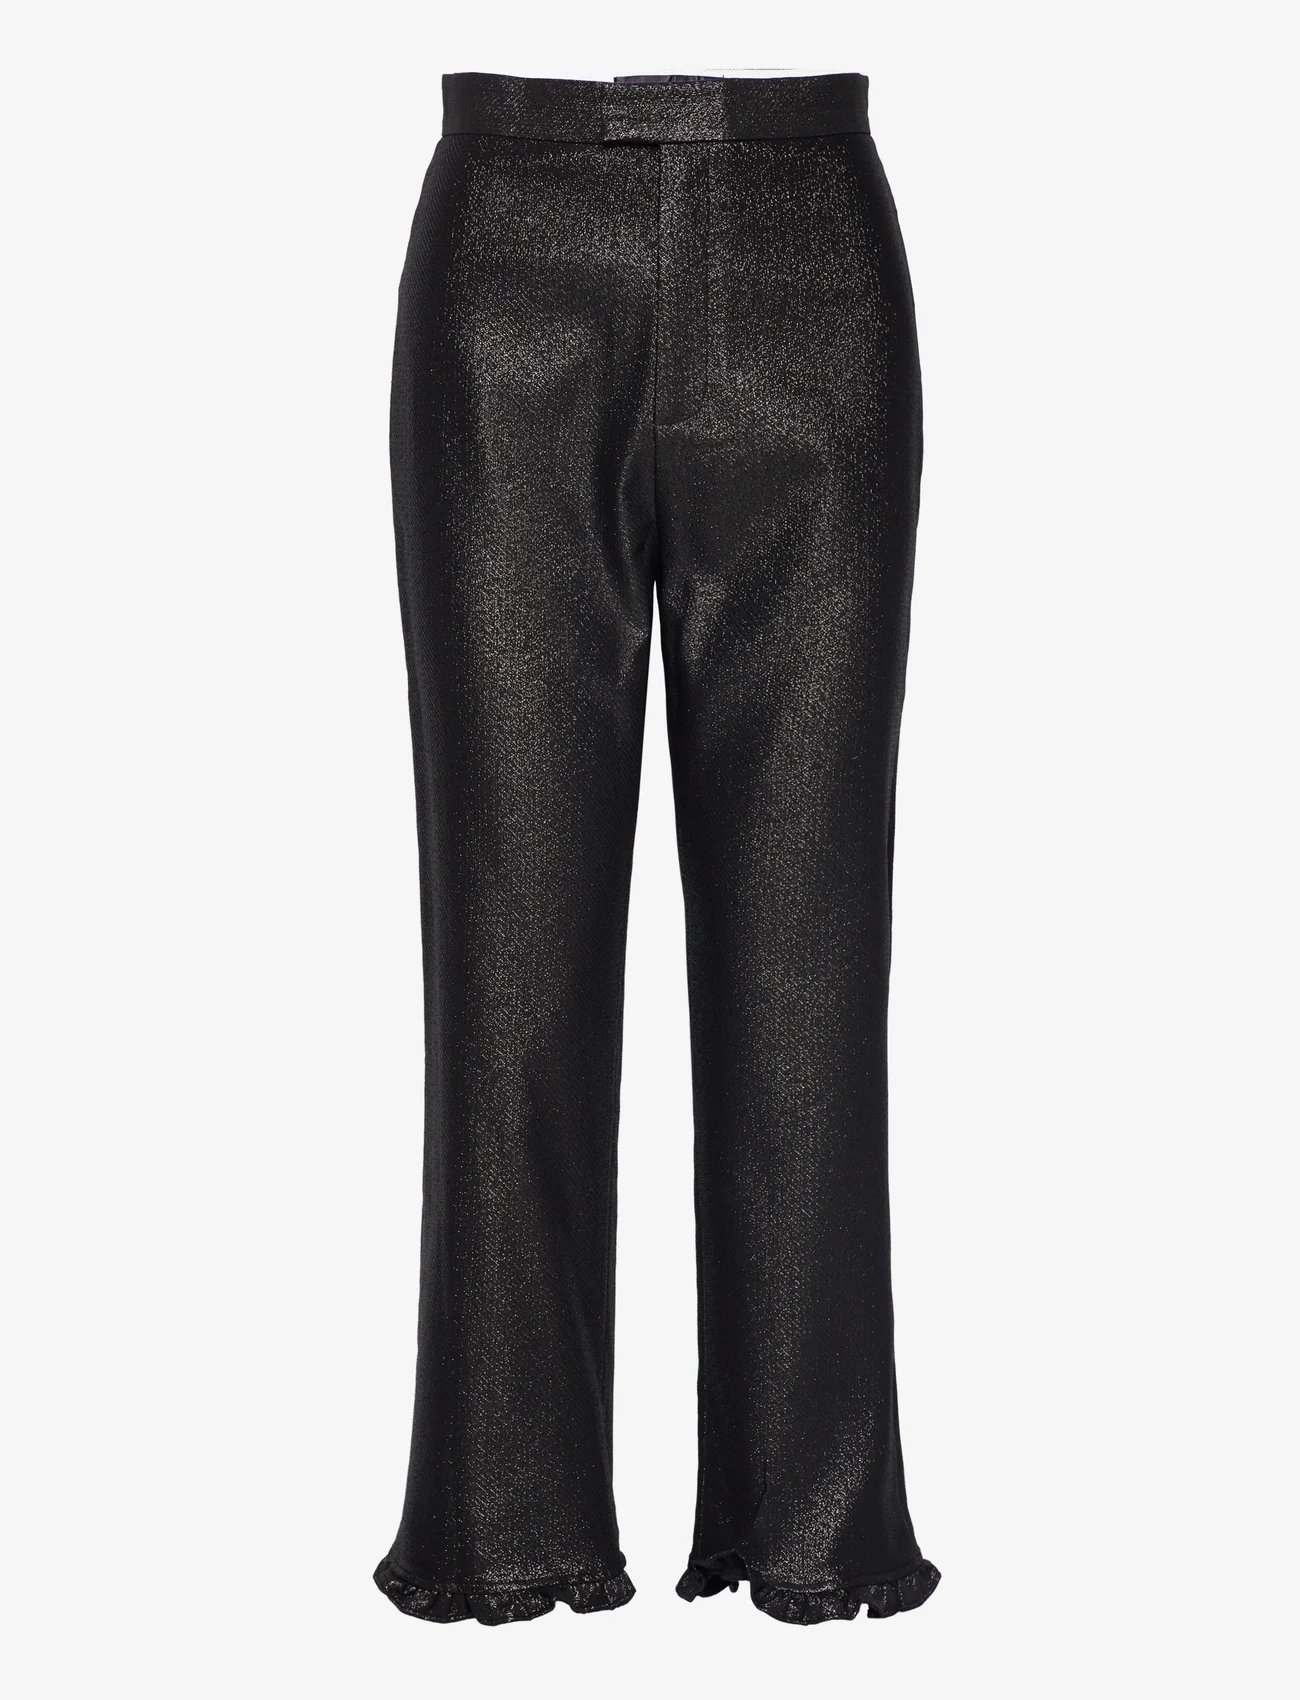 Custommade - Pammi BY NBS - straight leg trousers - anthracite black - 0